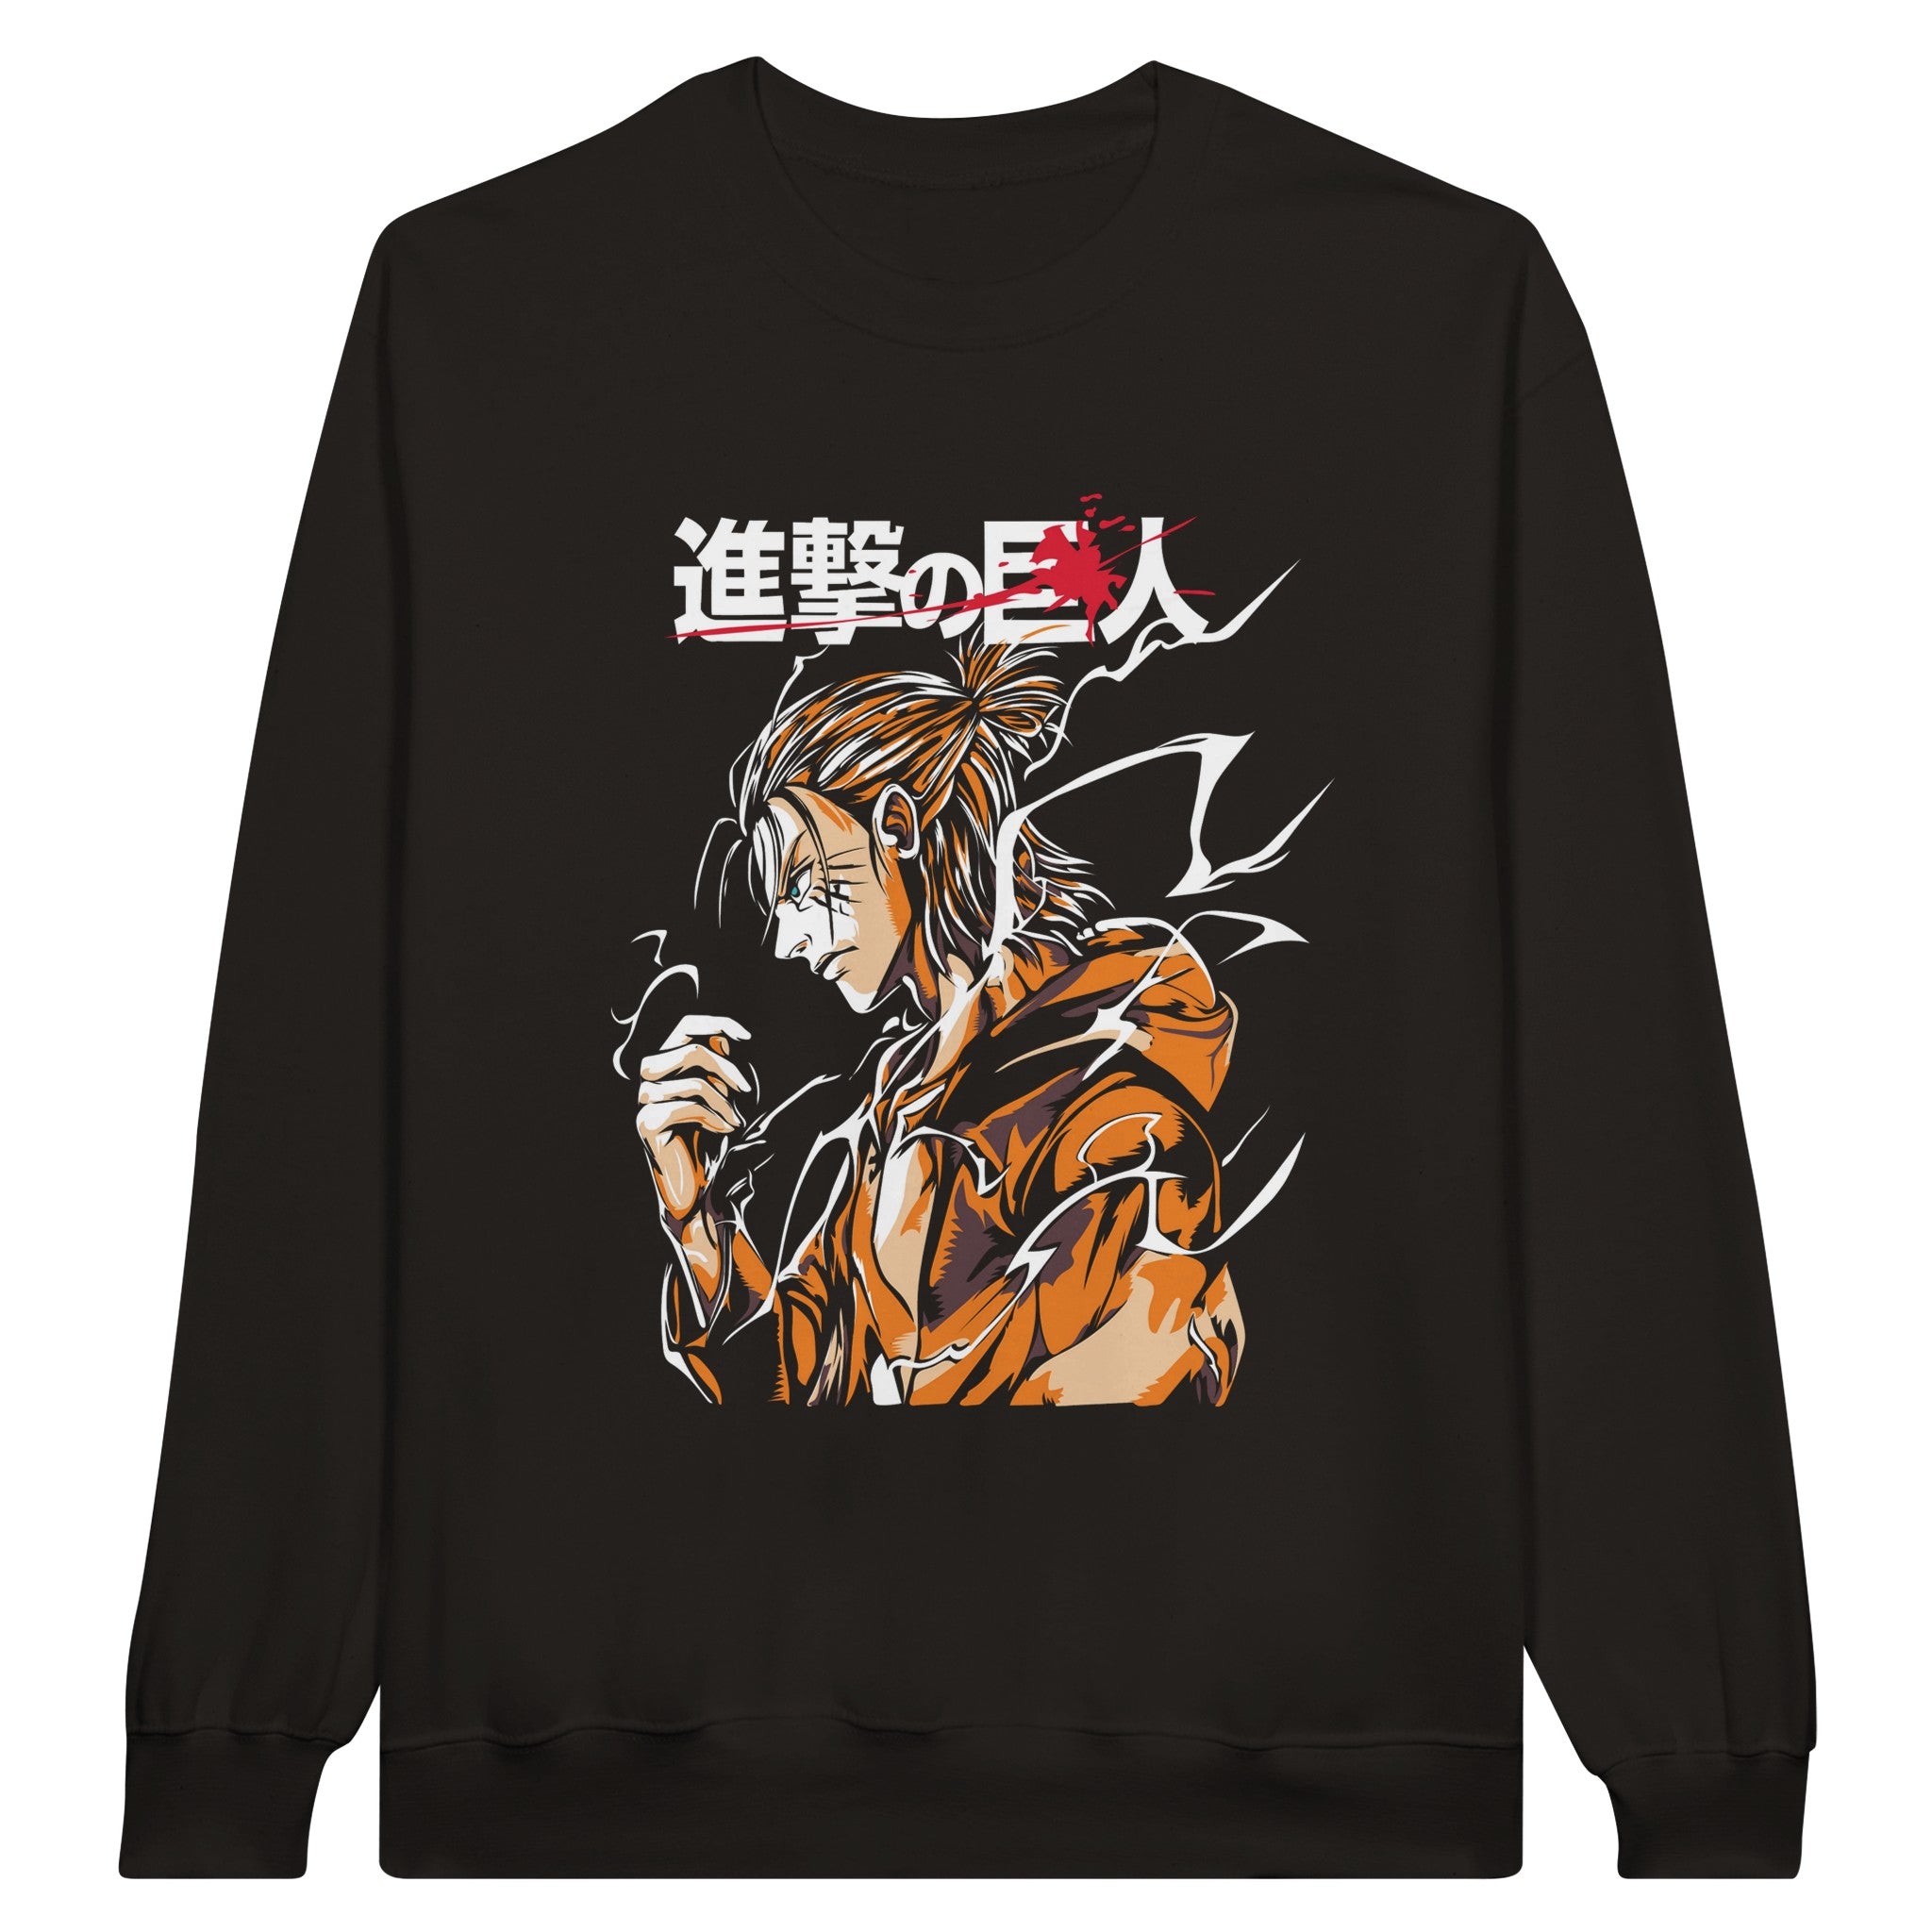 shop and buy attack on titan anime clothing eren yeager sweatshirt/jumper/longsleeve